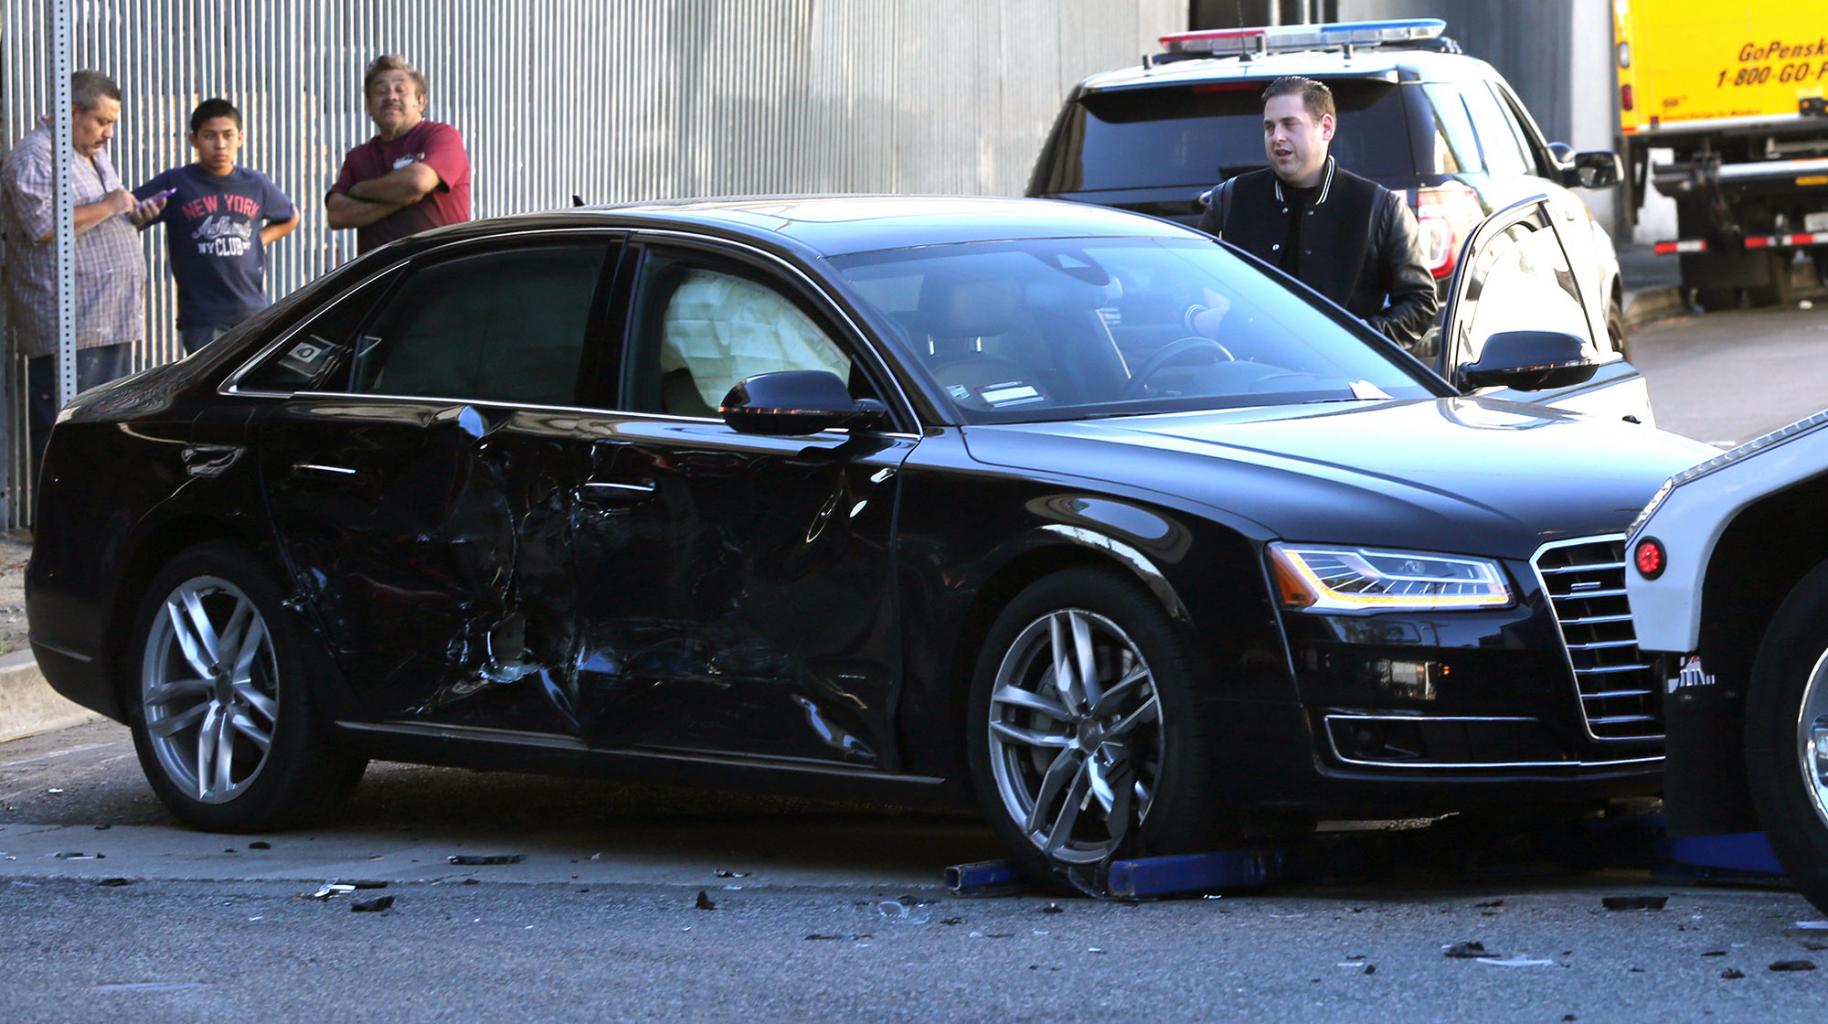 Jonah Hill Appeared â€˜Shakenâ€™ After Car Crash in Downtown Los Angeles